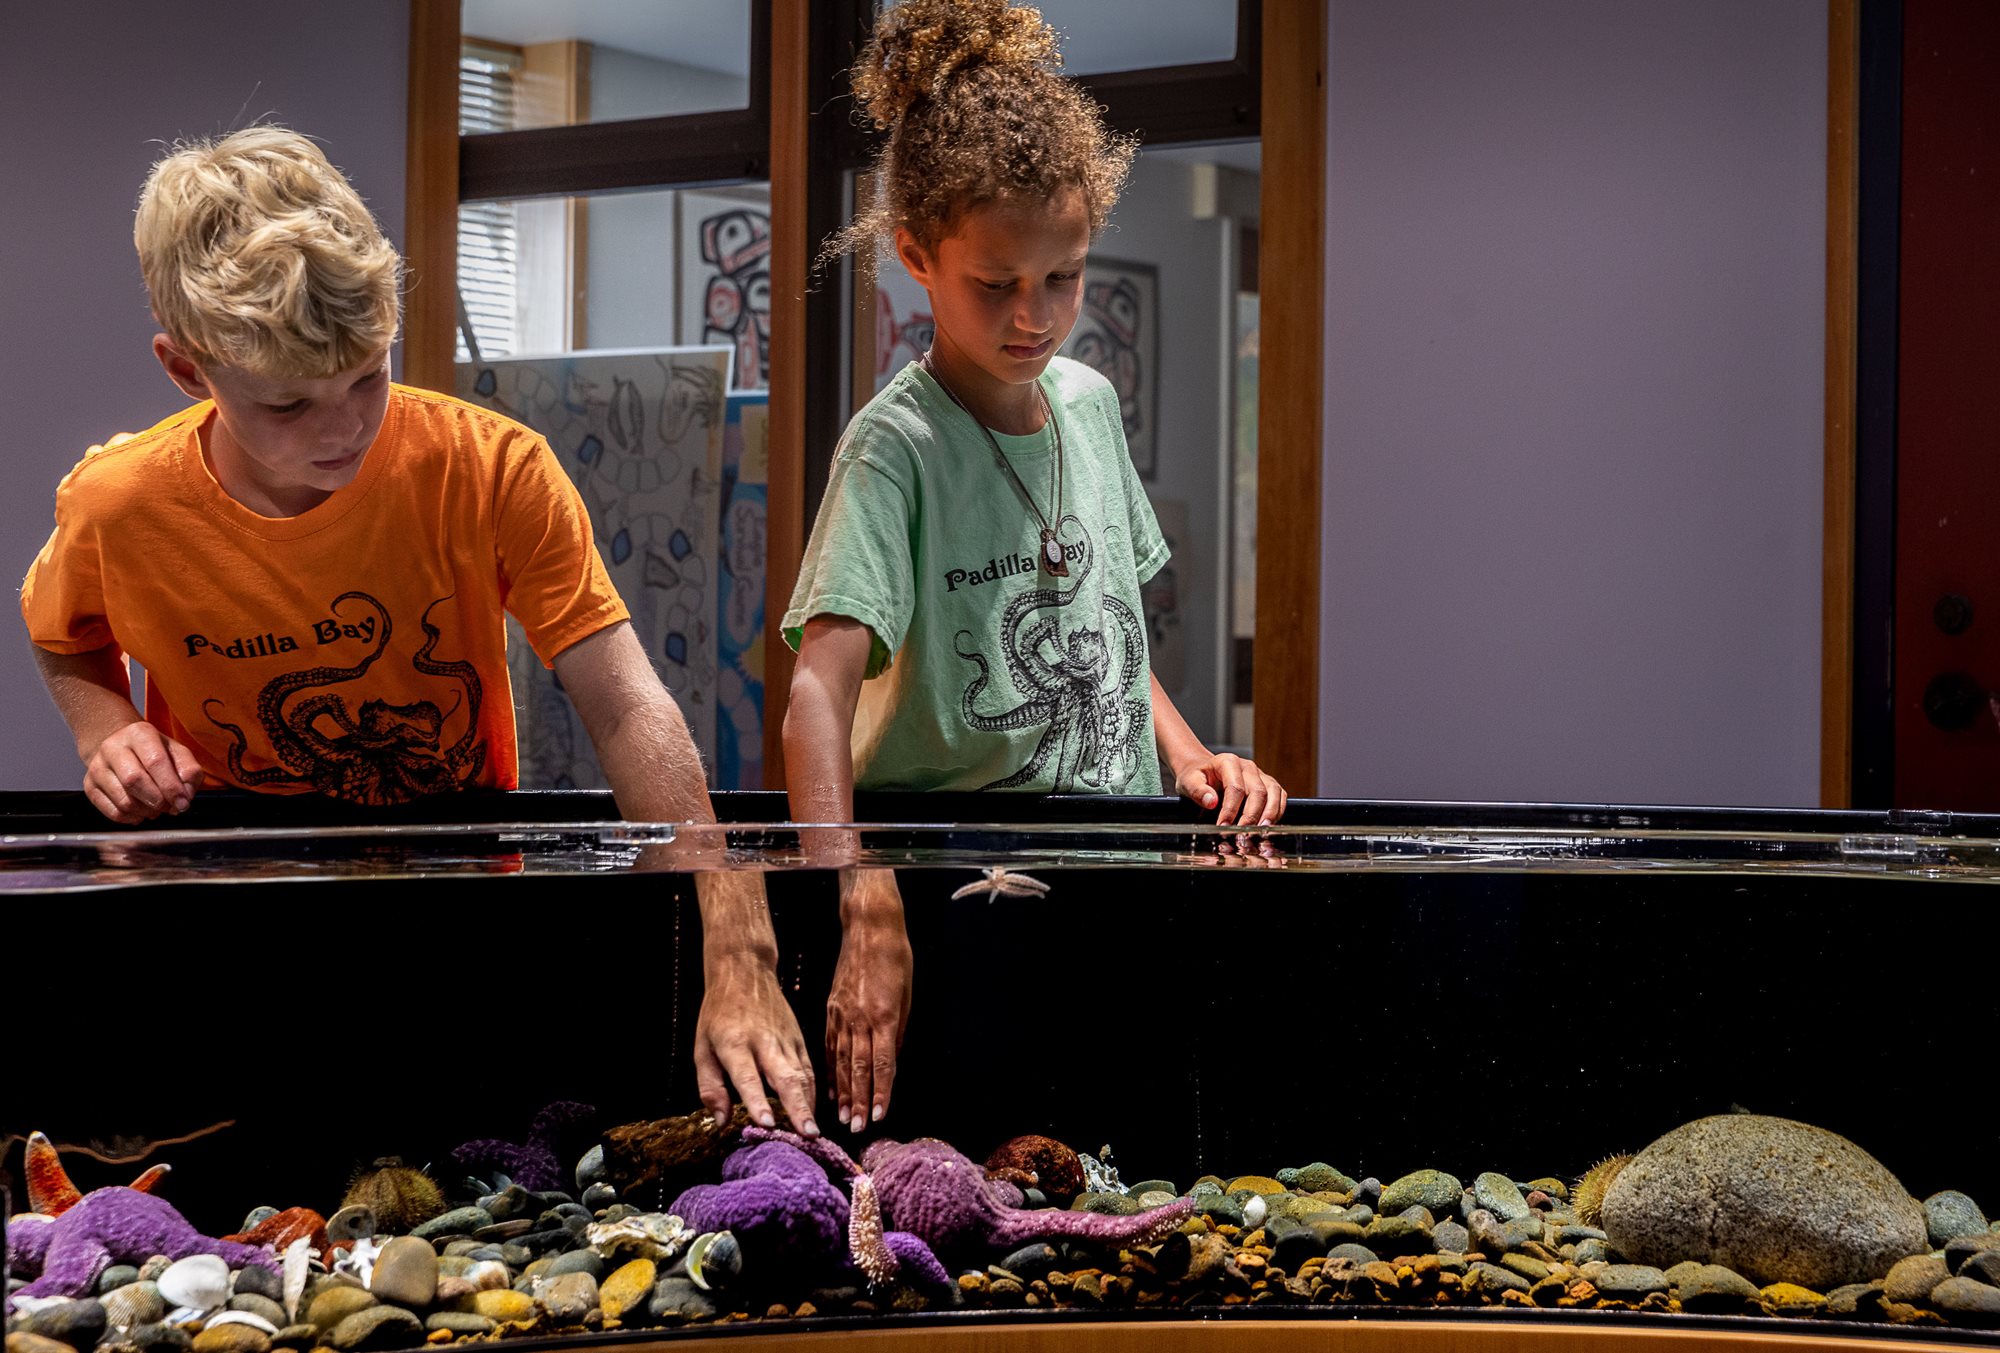 Boy with blonde hair and girl with brown hair touch sea stars in a touch tank